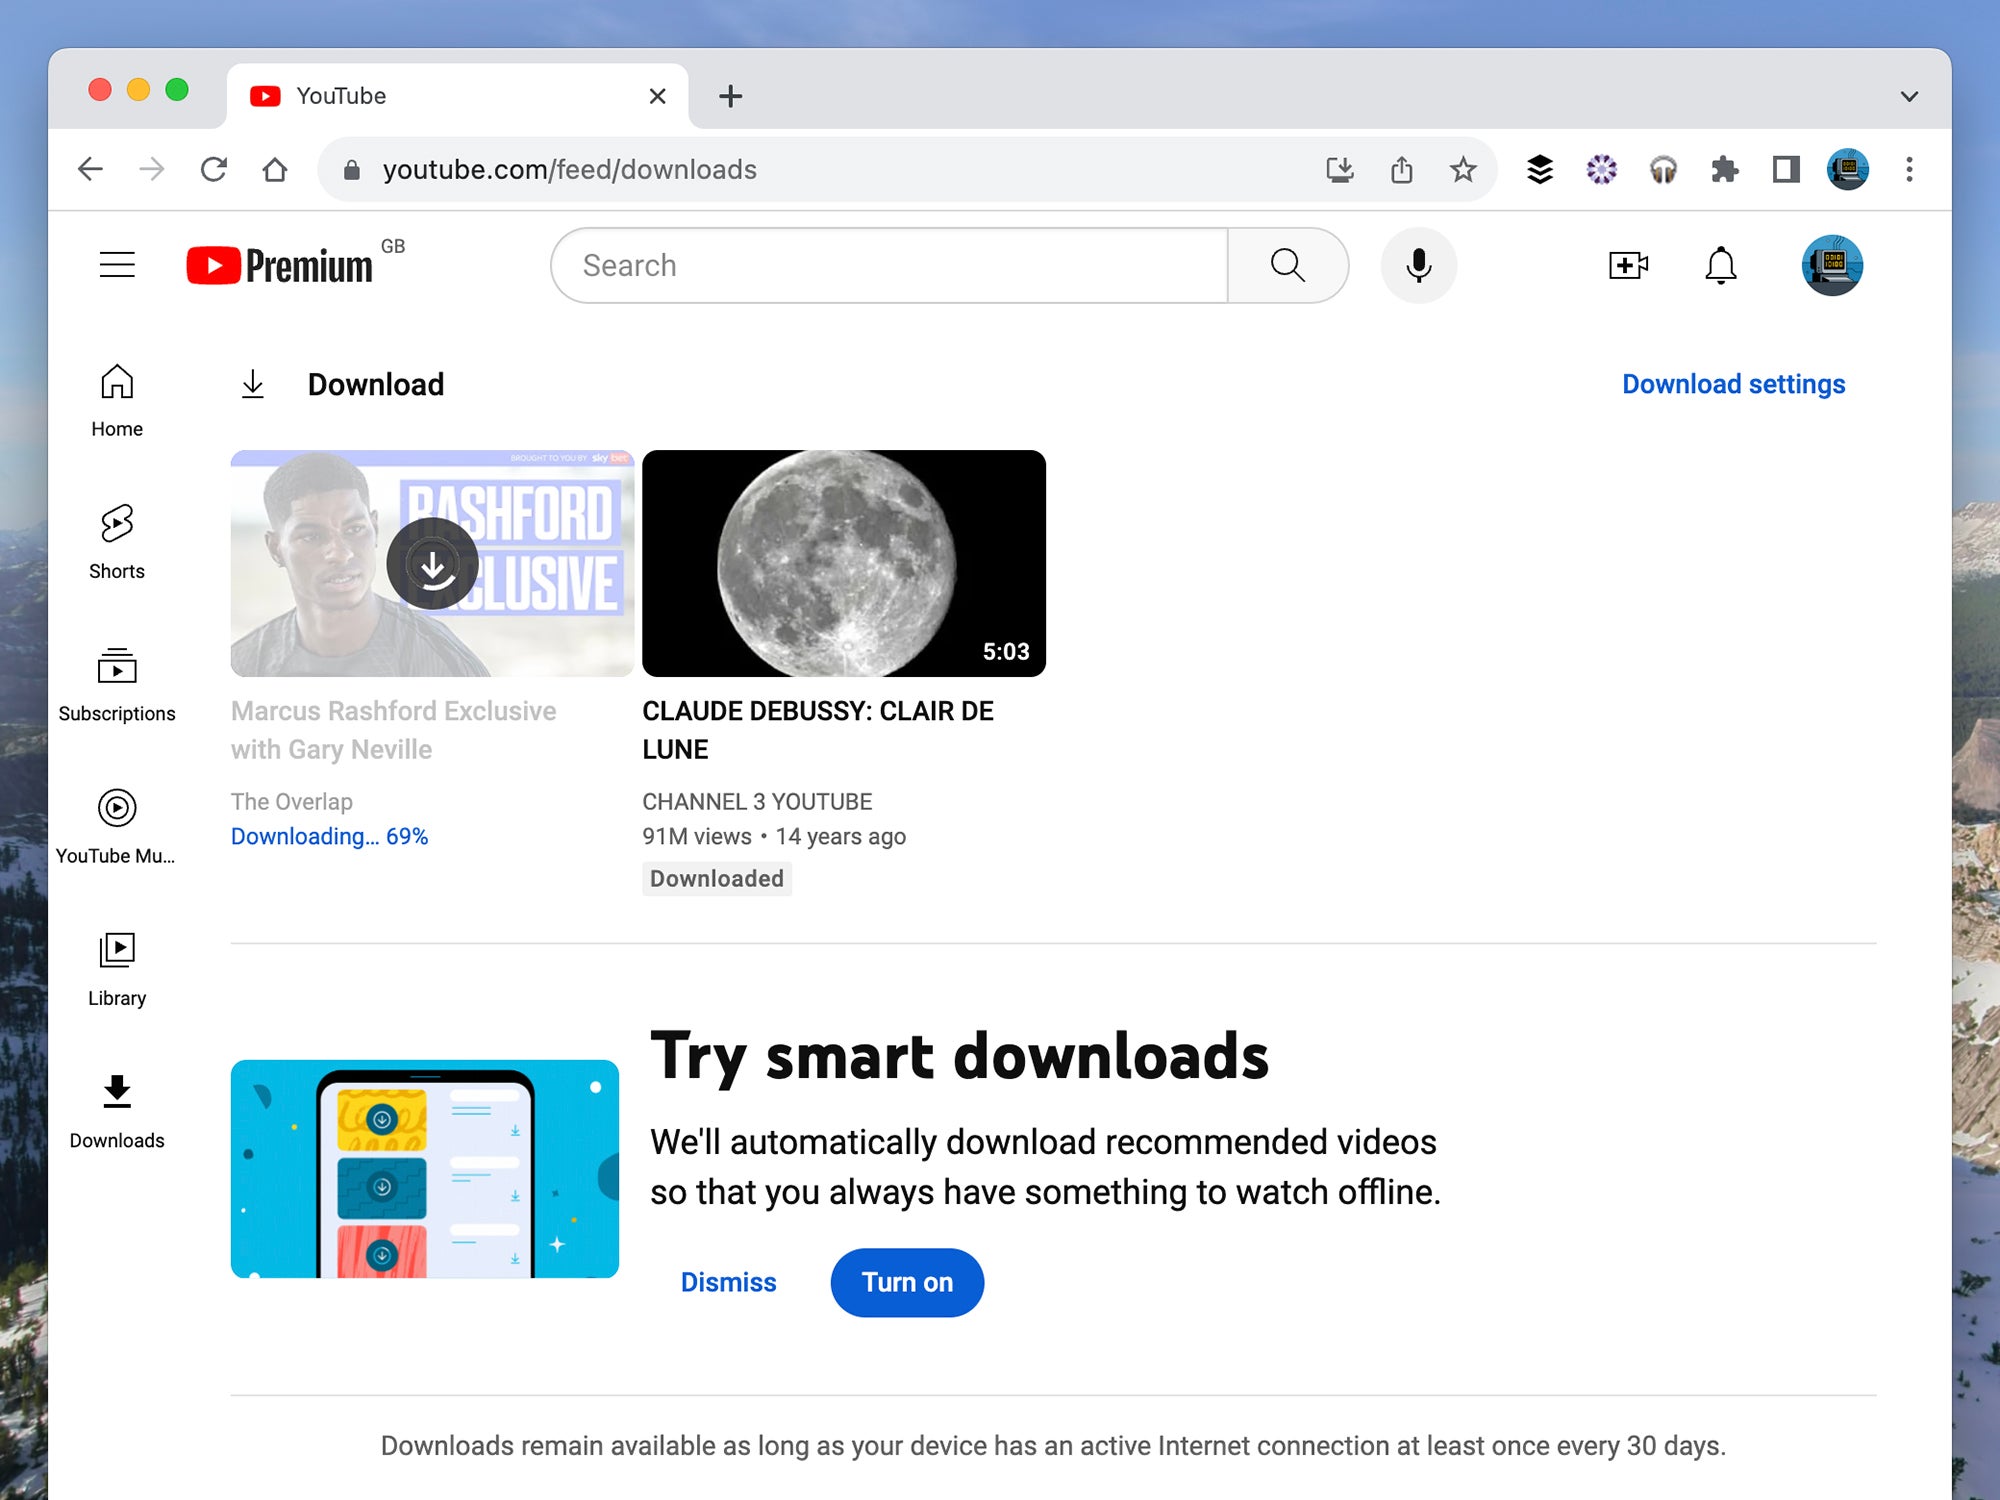 The YouTube Premium downloads page on Google Chrome for desktop.